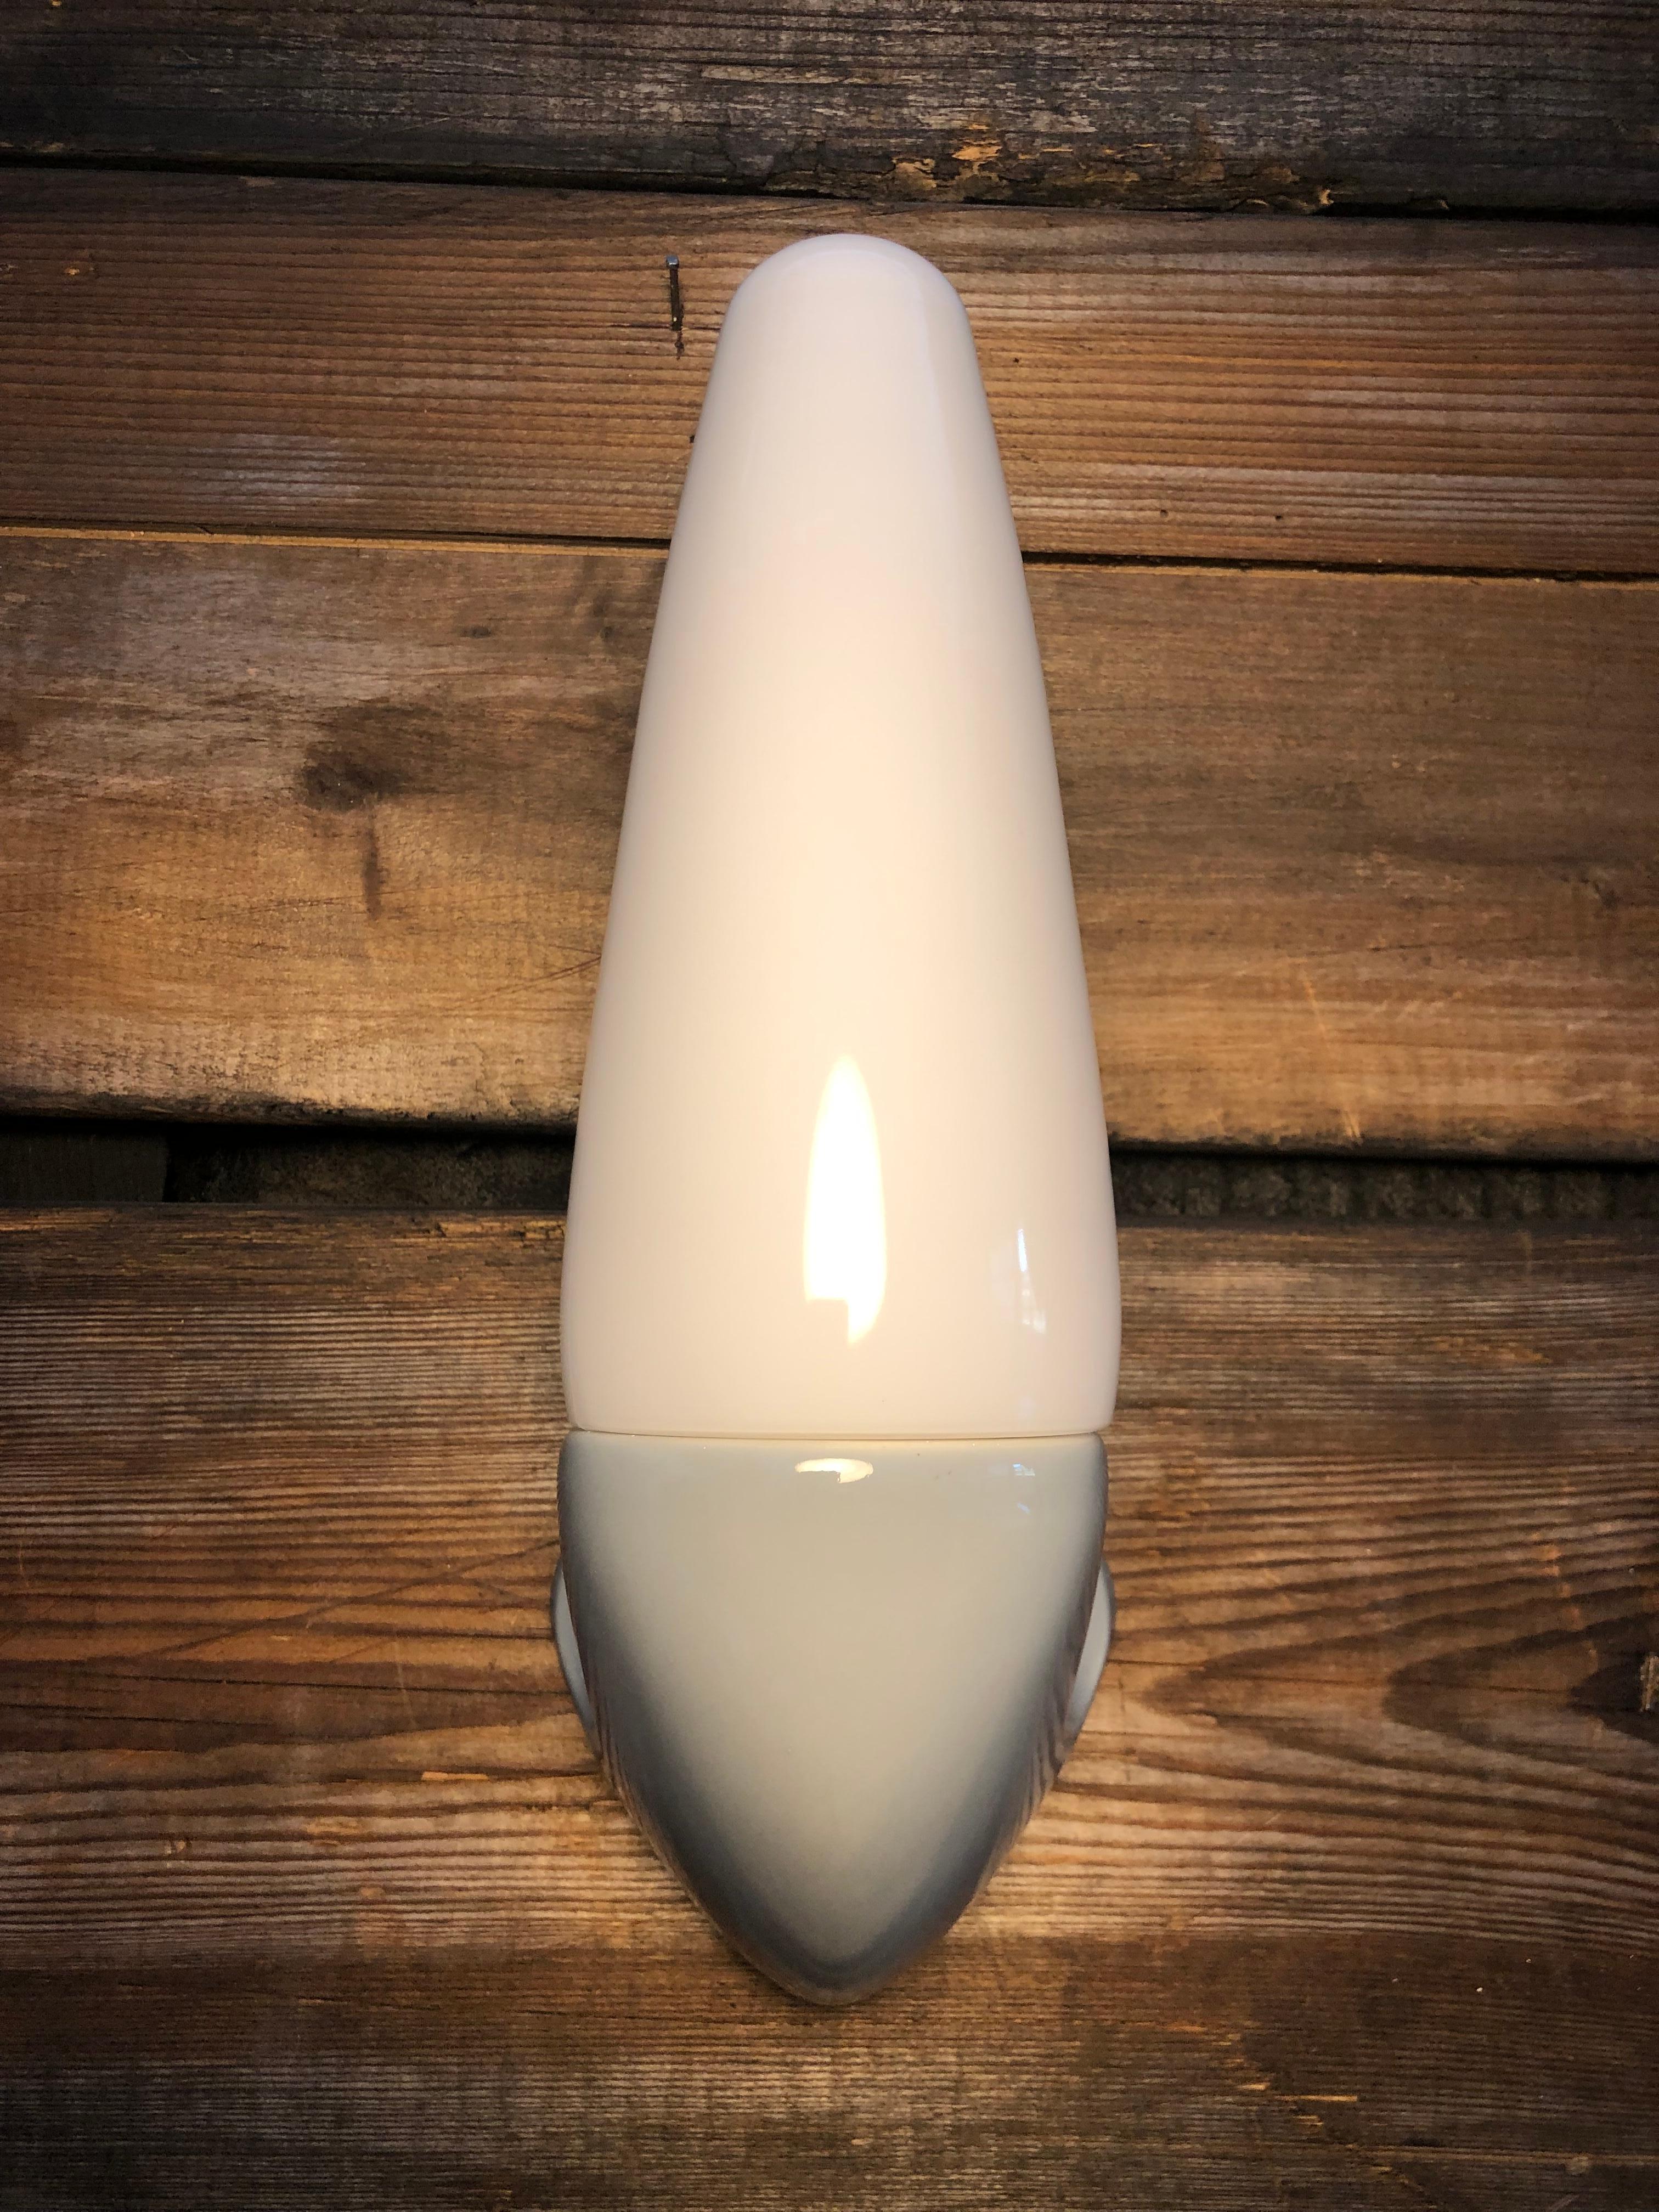 Vintage Ifö of Sweden ceramic bathroom lamps from the 1960s in grey. 
Designed by Sigvard Bernadotte. 
Opaline glass shades. 
Ceramic bulb holders for an E14 bulb
Lamps can be used as up or down lights.
In great condition and ready to use.
Will be